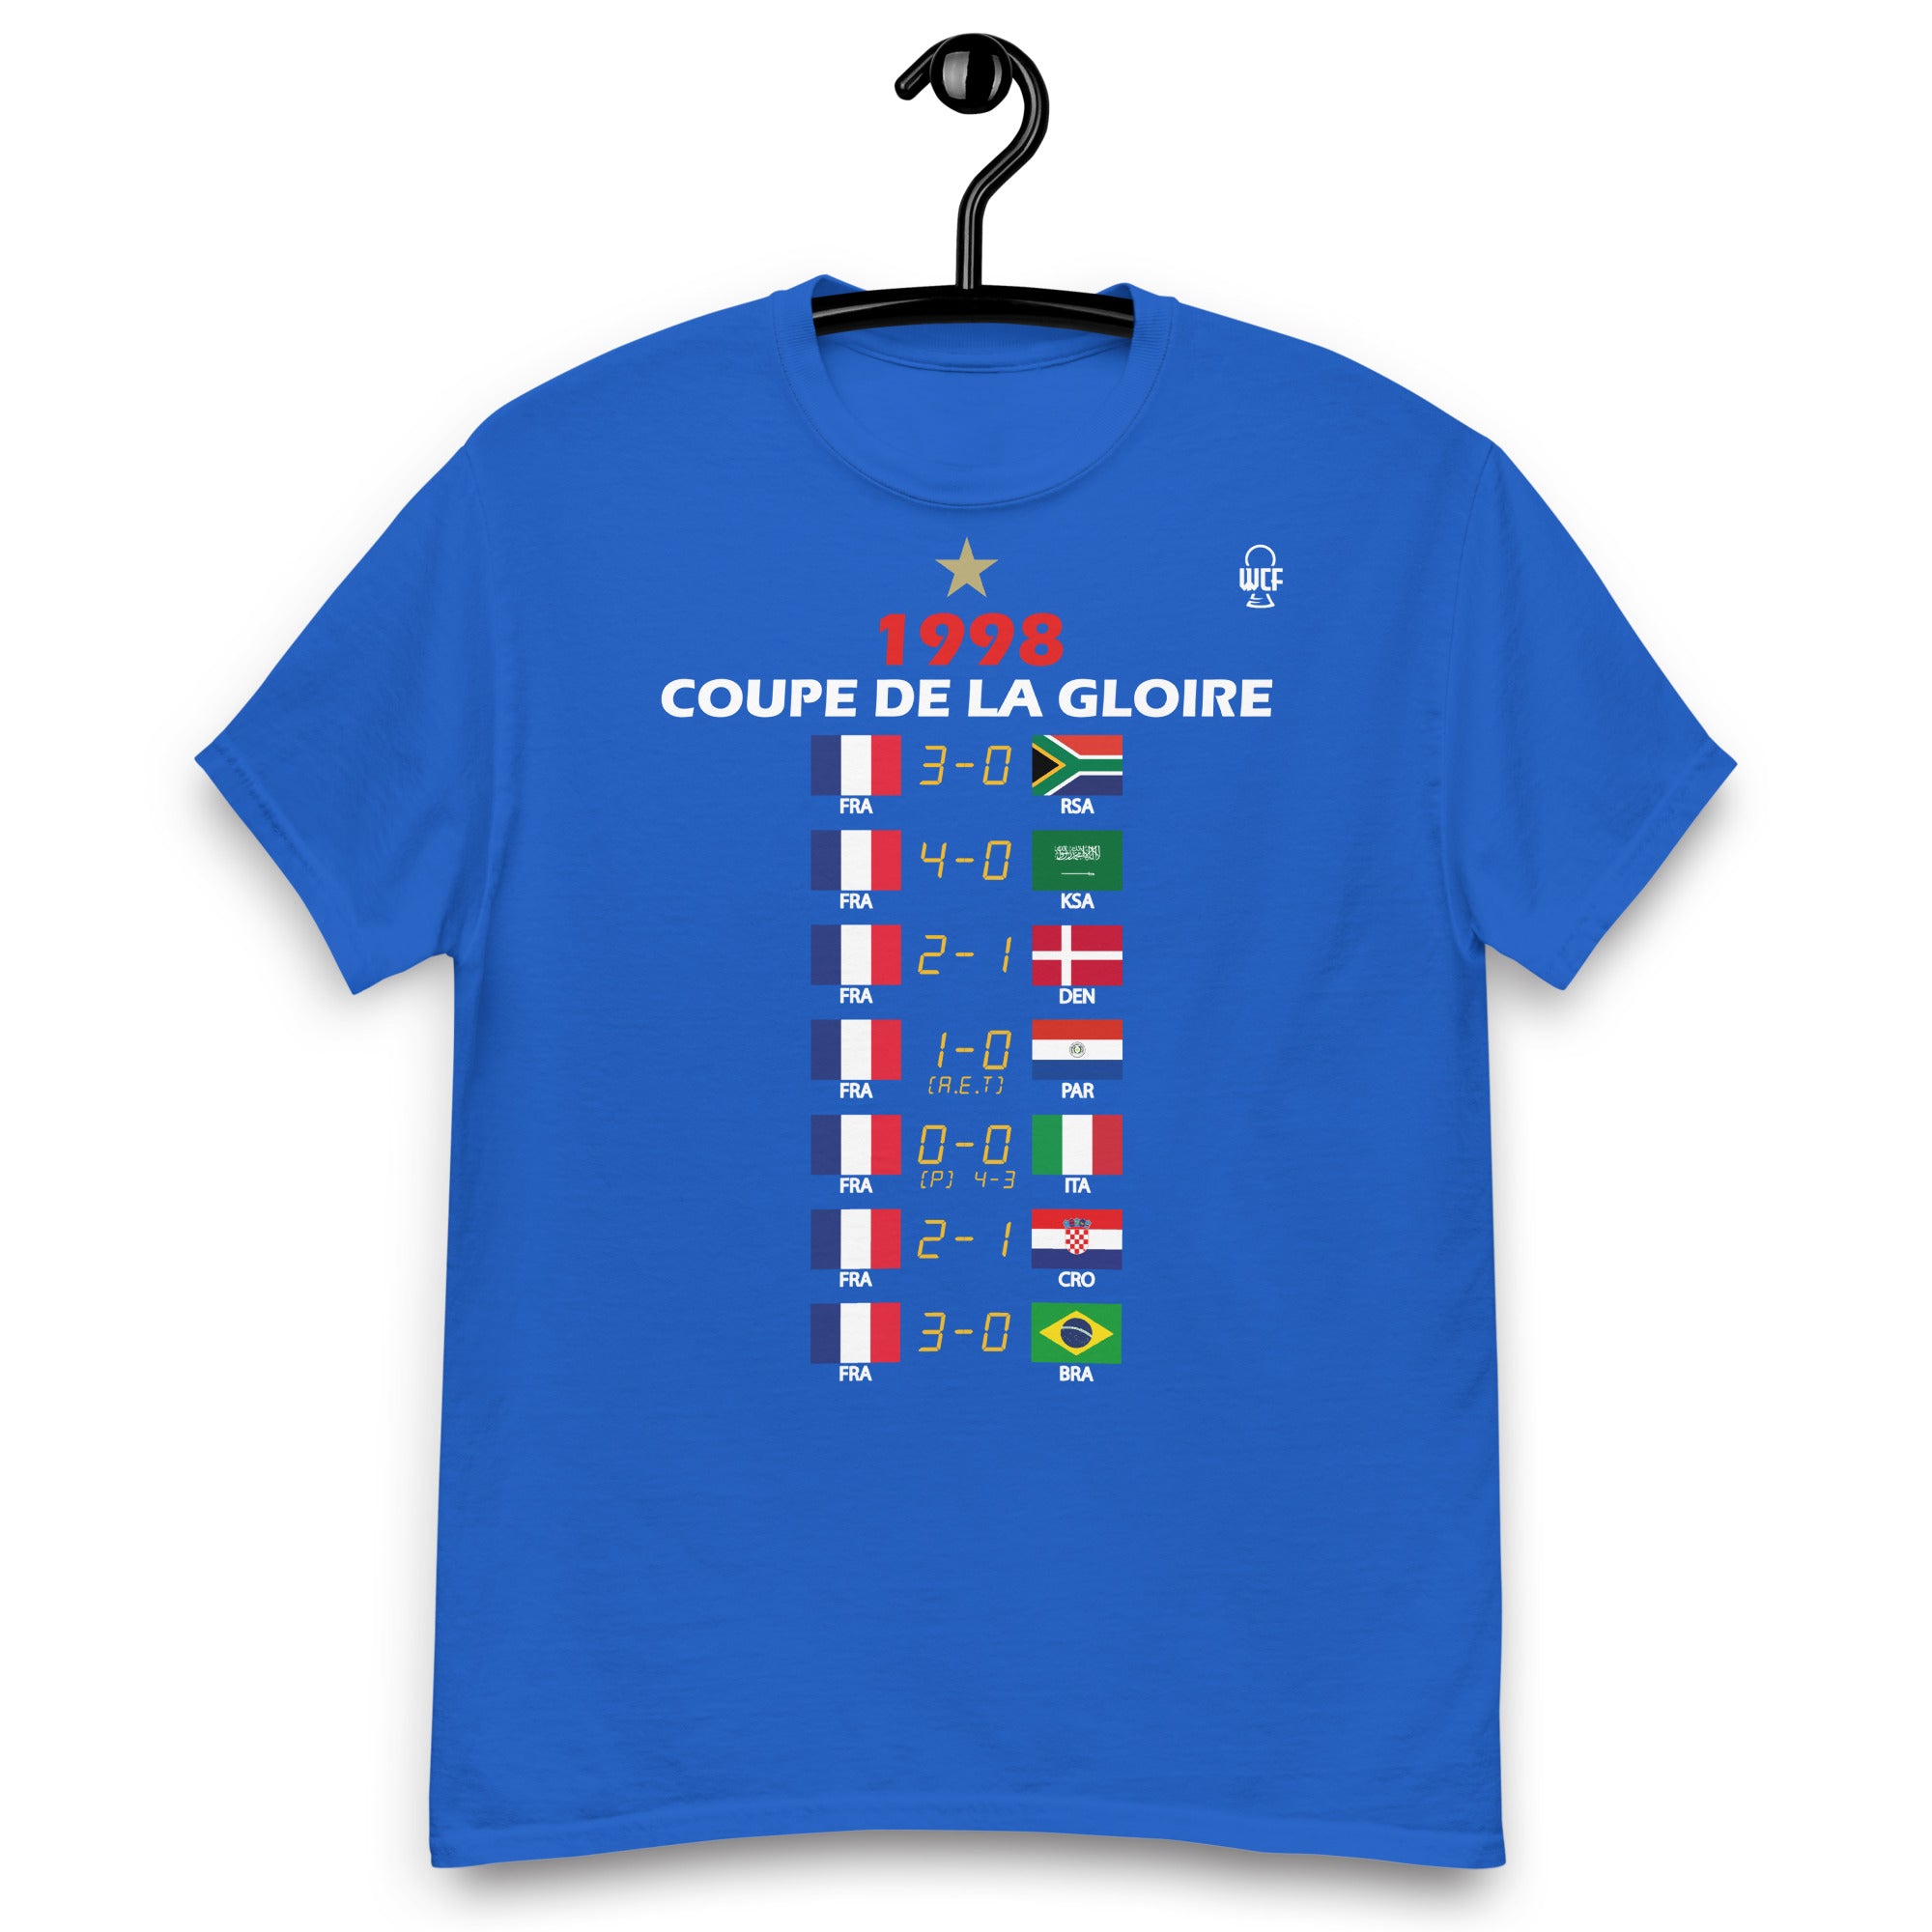 World Cup 1998 Classic T-Shirt - Road to the Glory - FRANCE